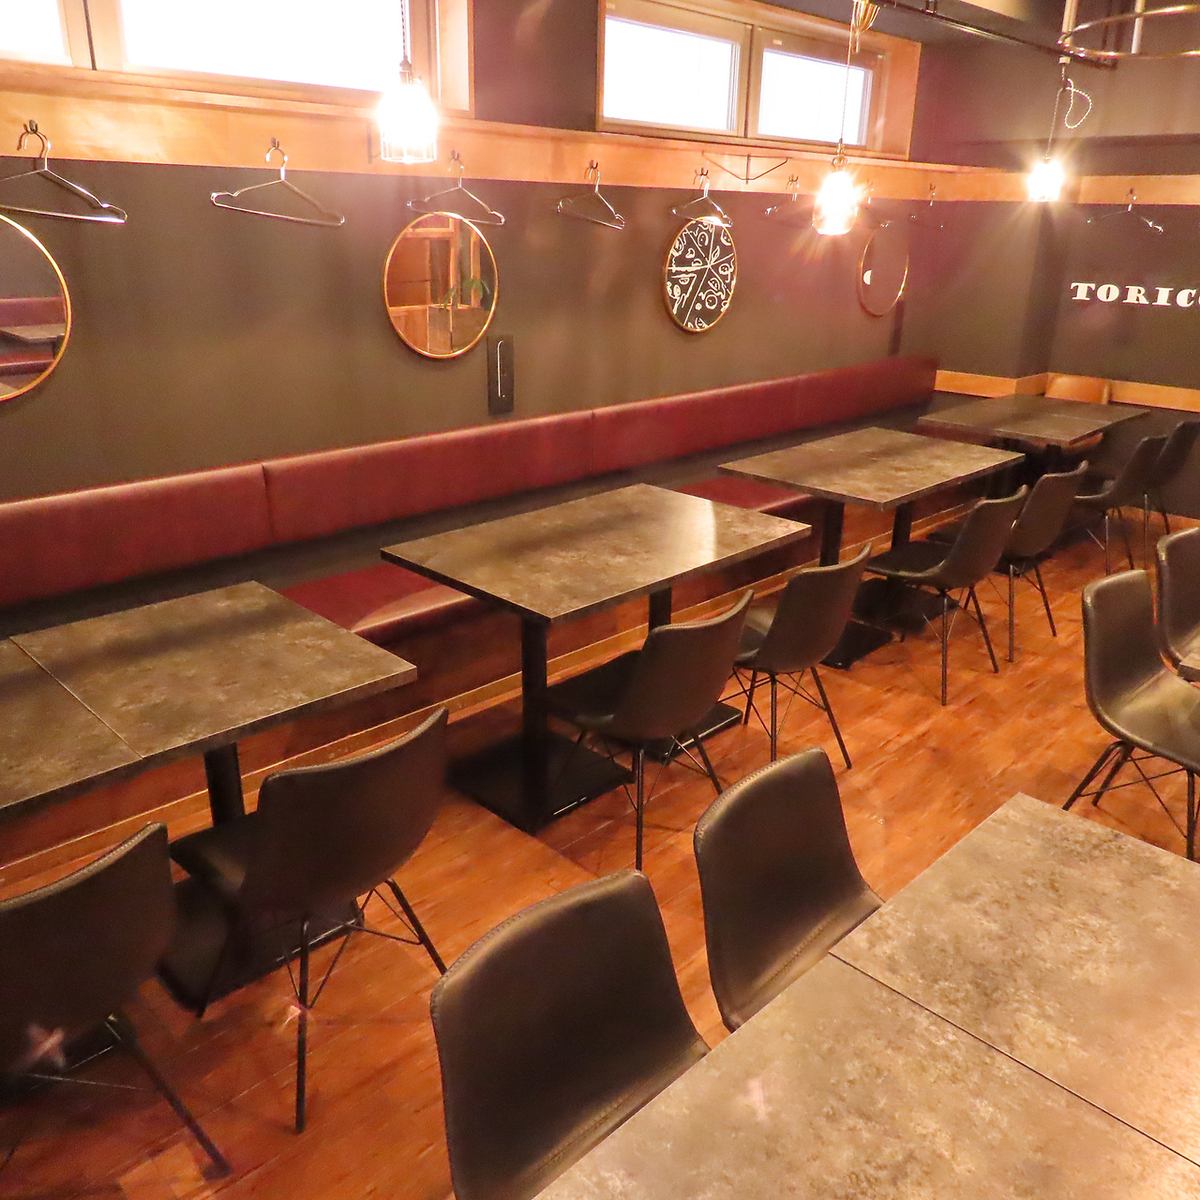 Many private rooms ☆ We have private rooms that can accommodate 4 to 40 people!